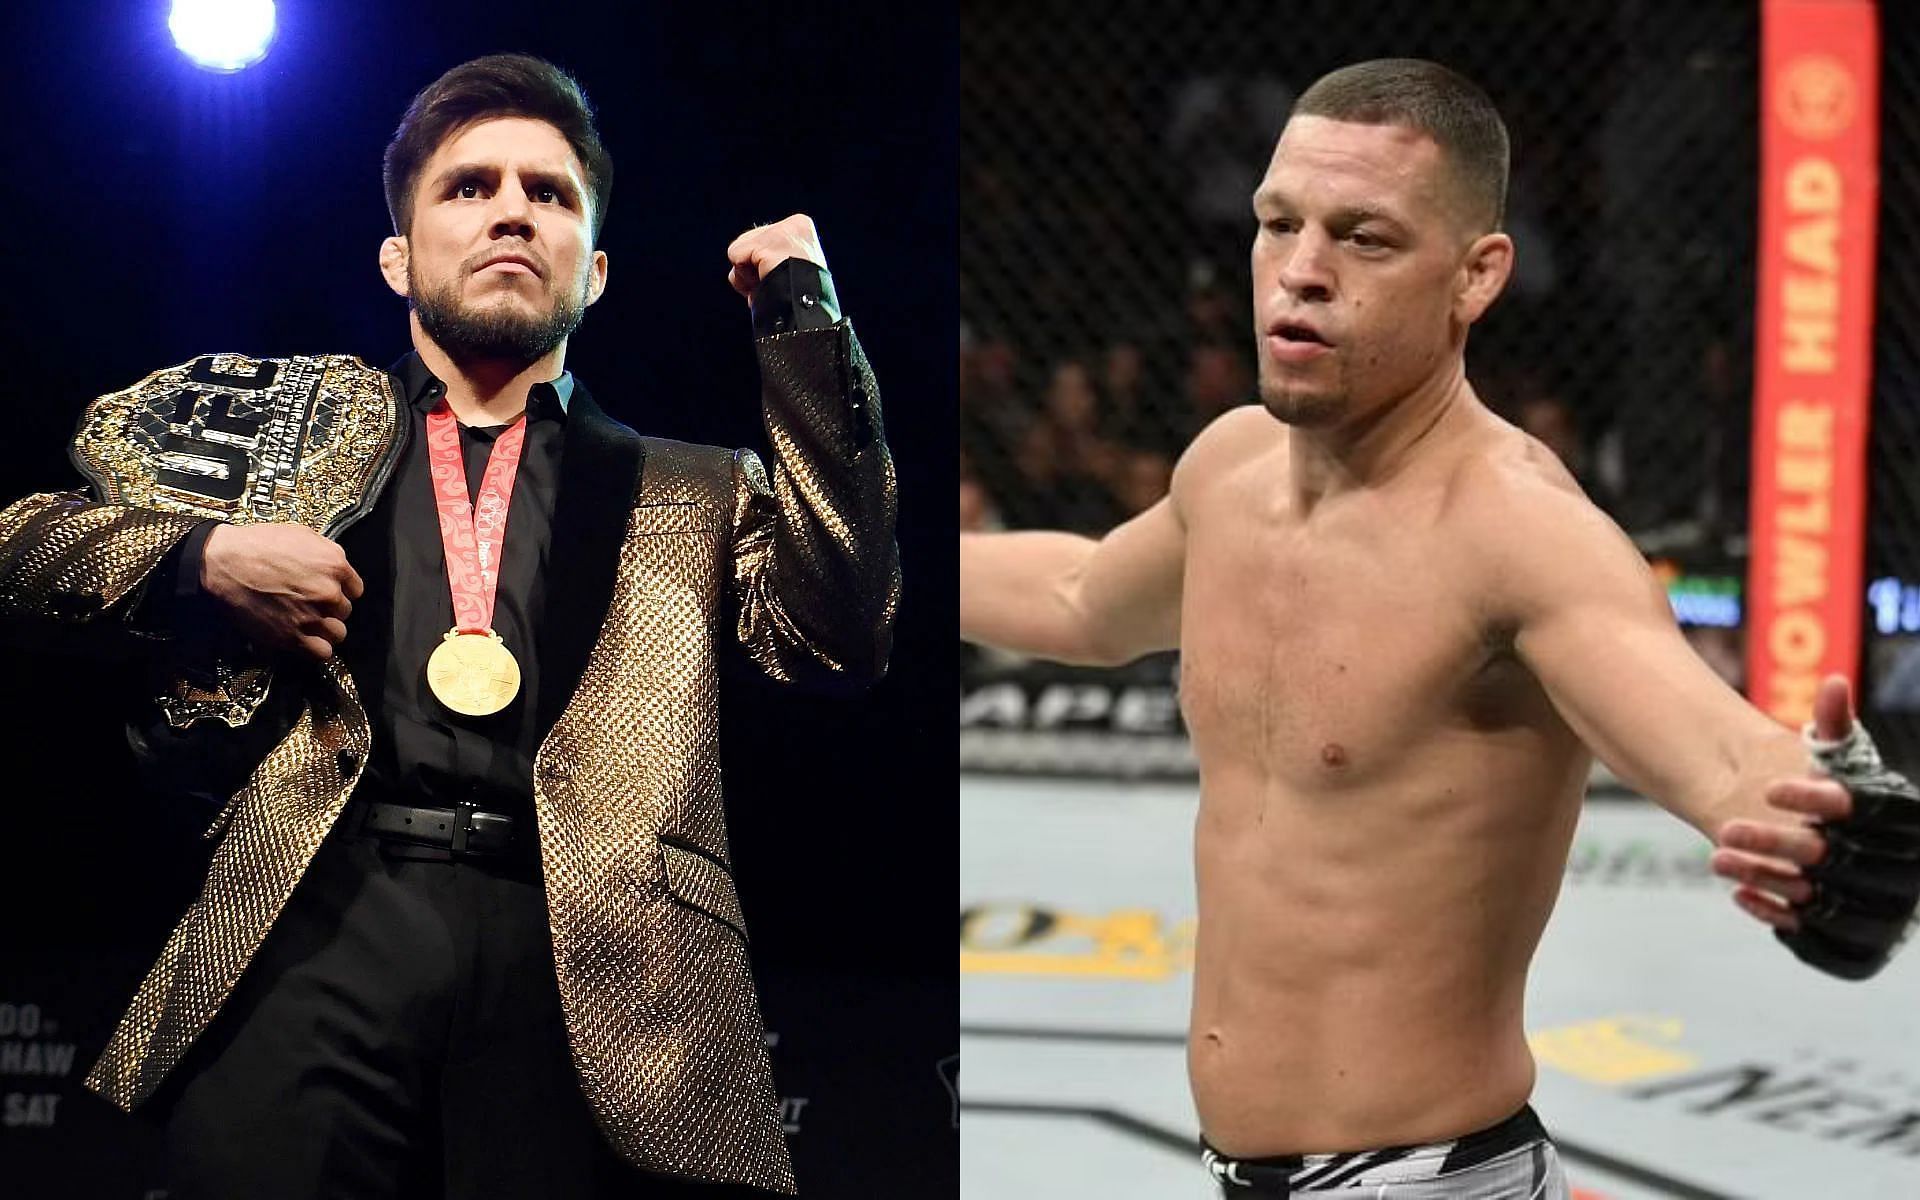 Henry Cejudo (left) and Nate Diaz (right)